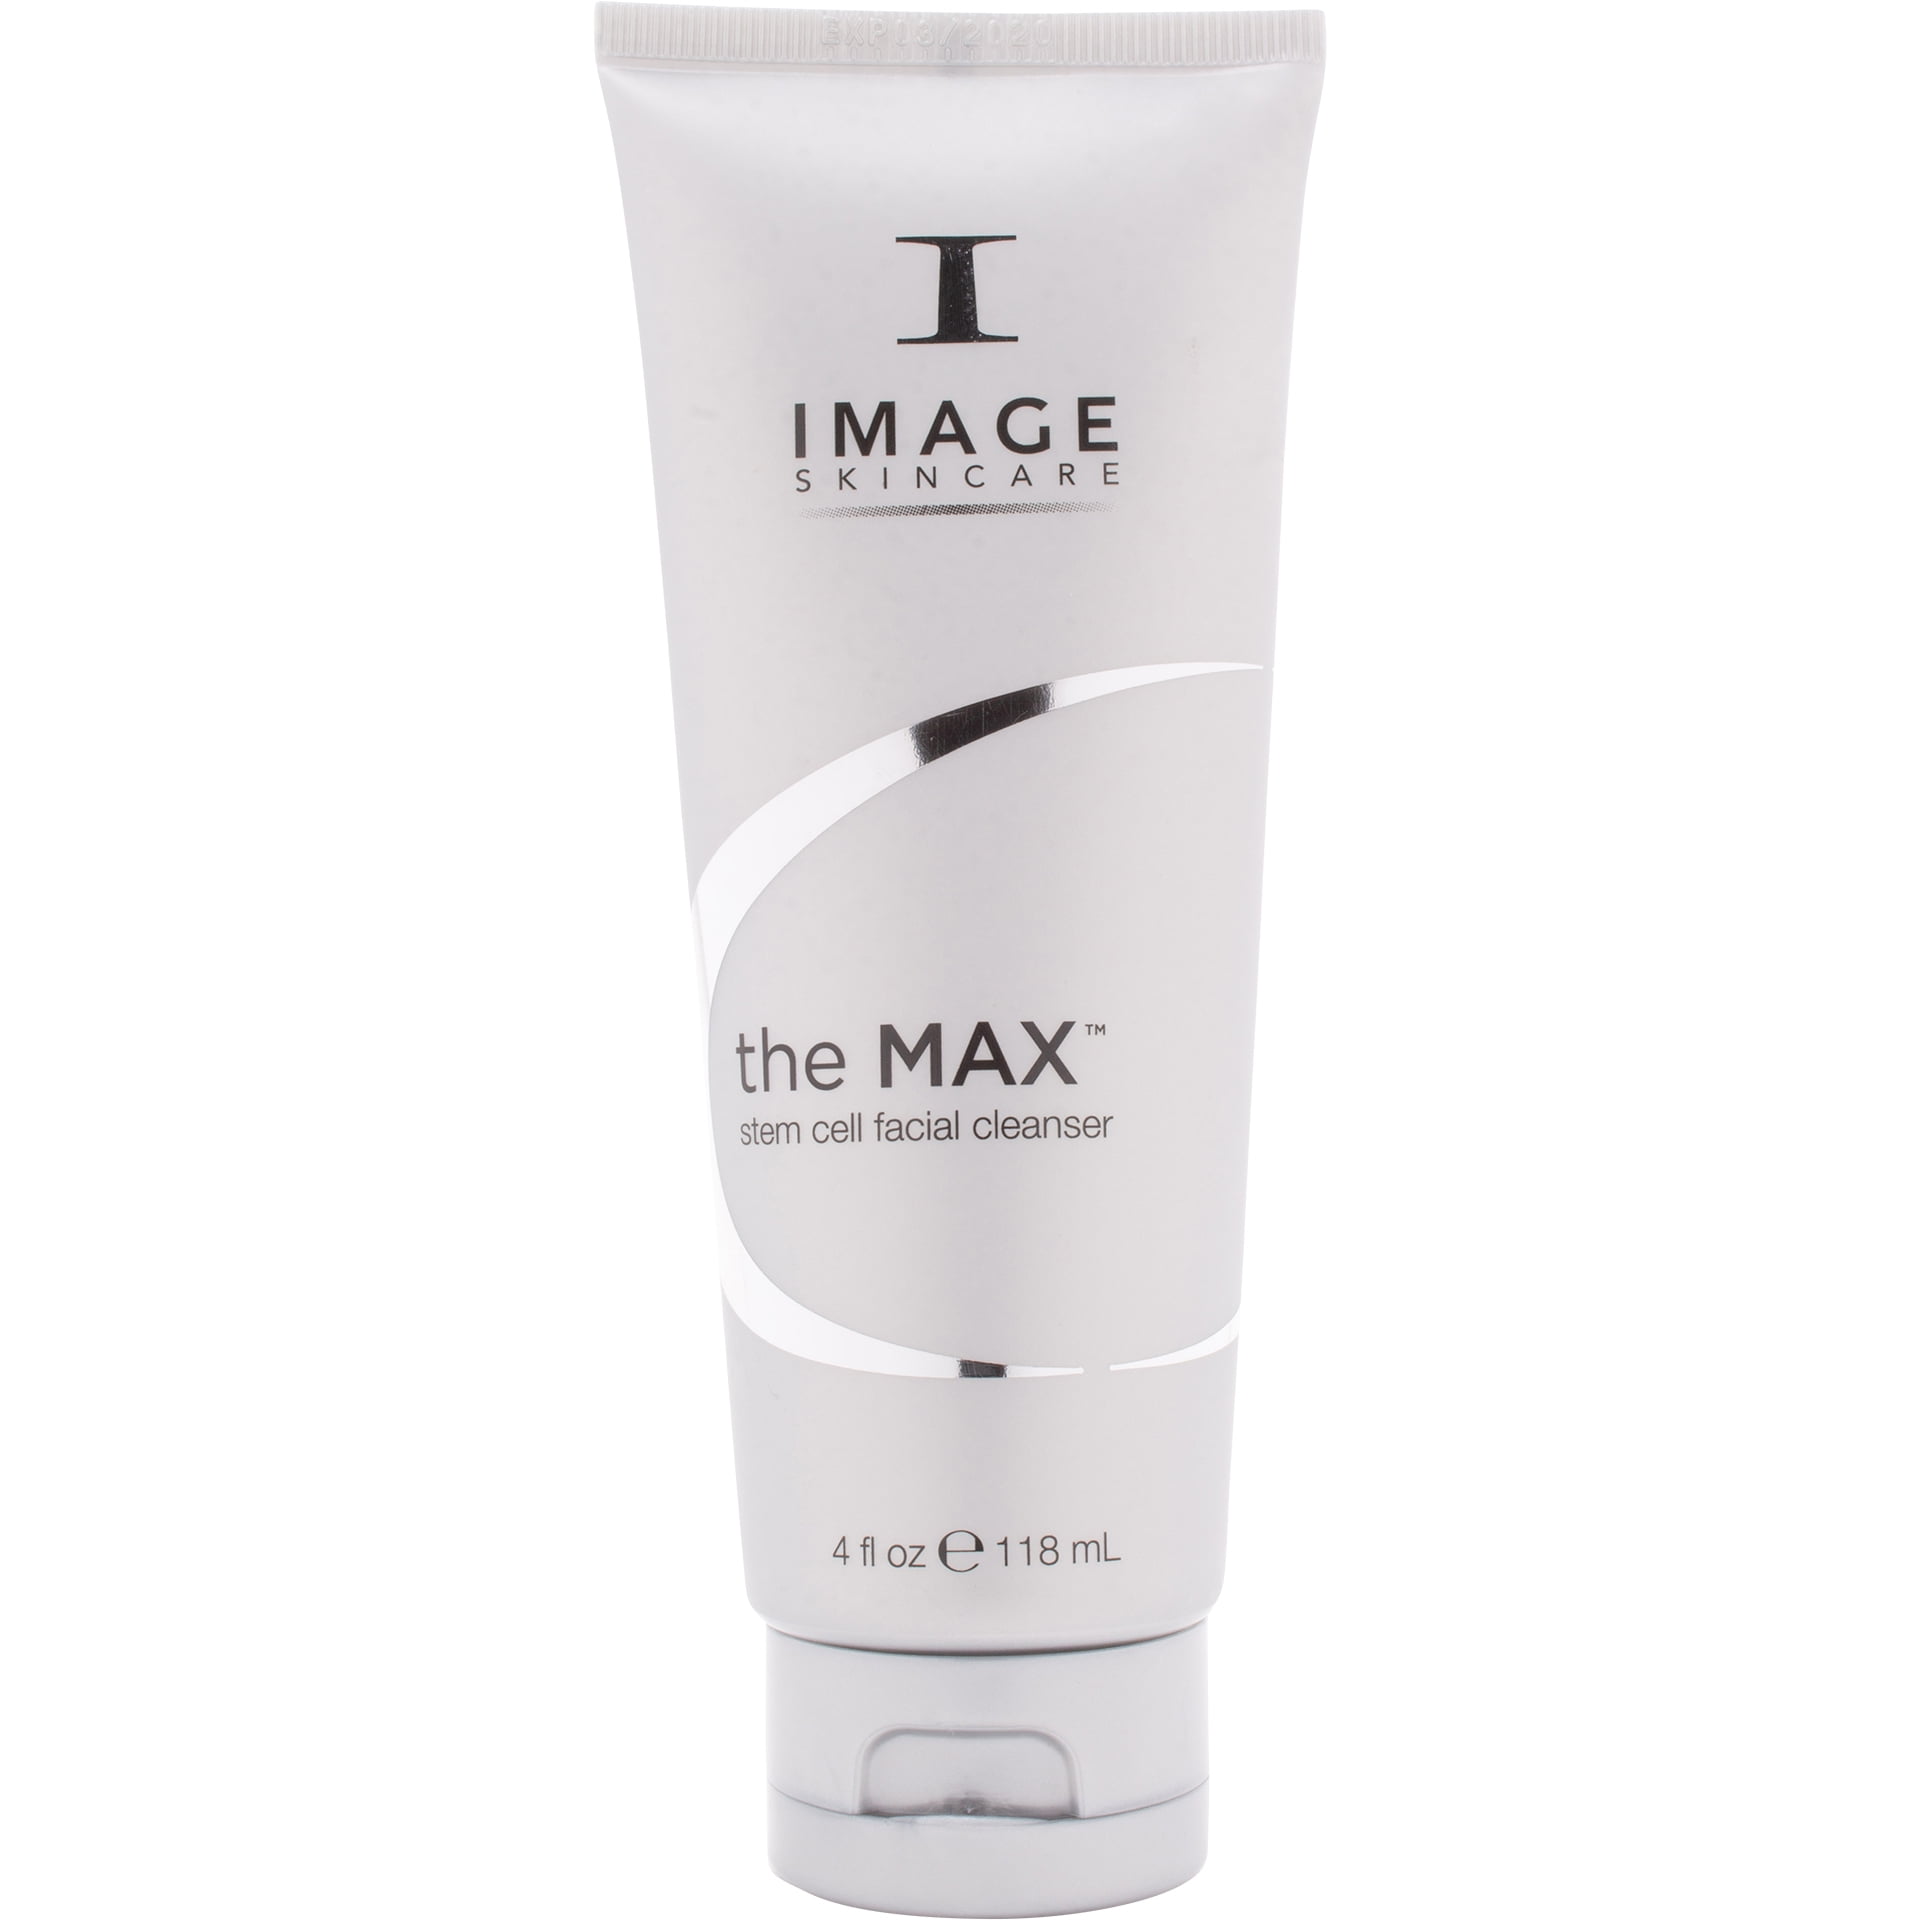 Image Skincare The Max Stem Cell Facial Cleanser 4 Oz